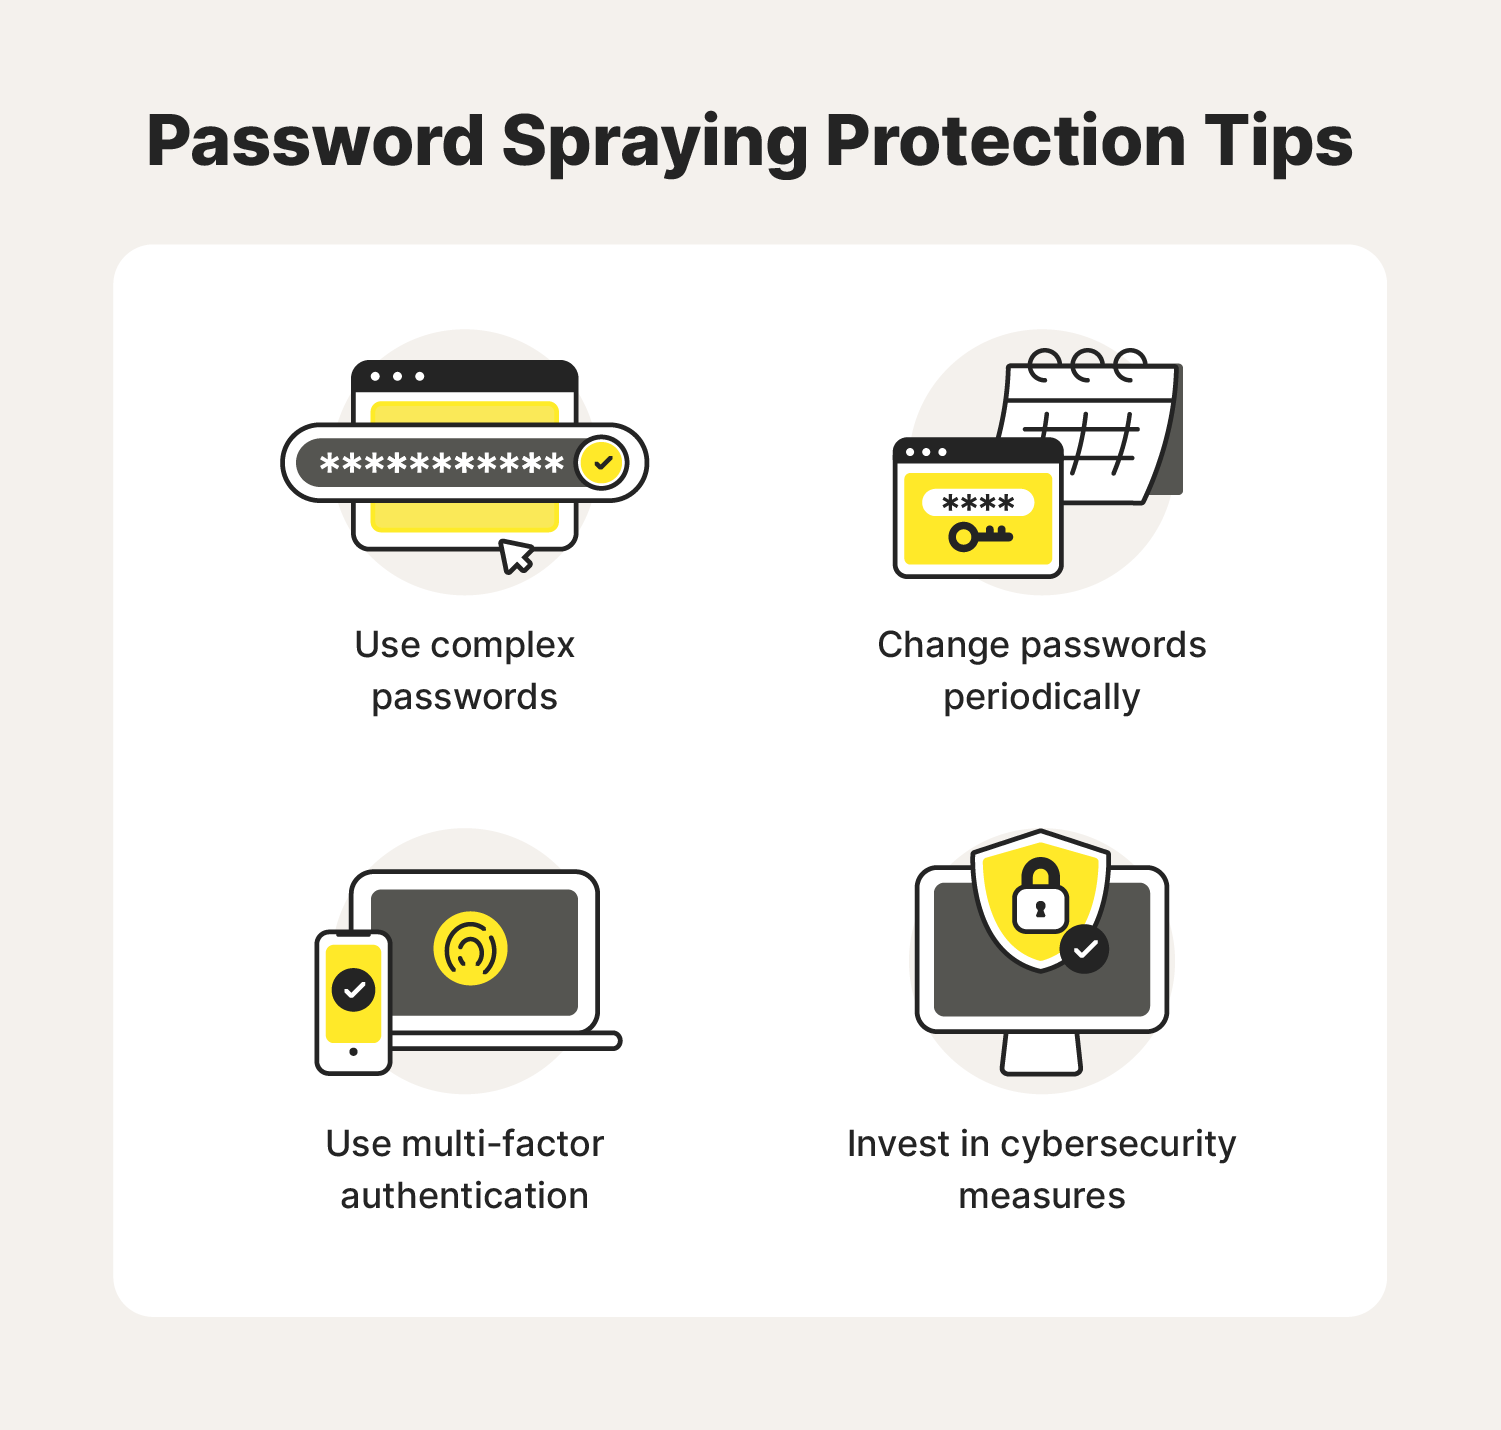 Password spraying protection tips